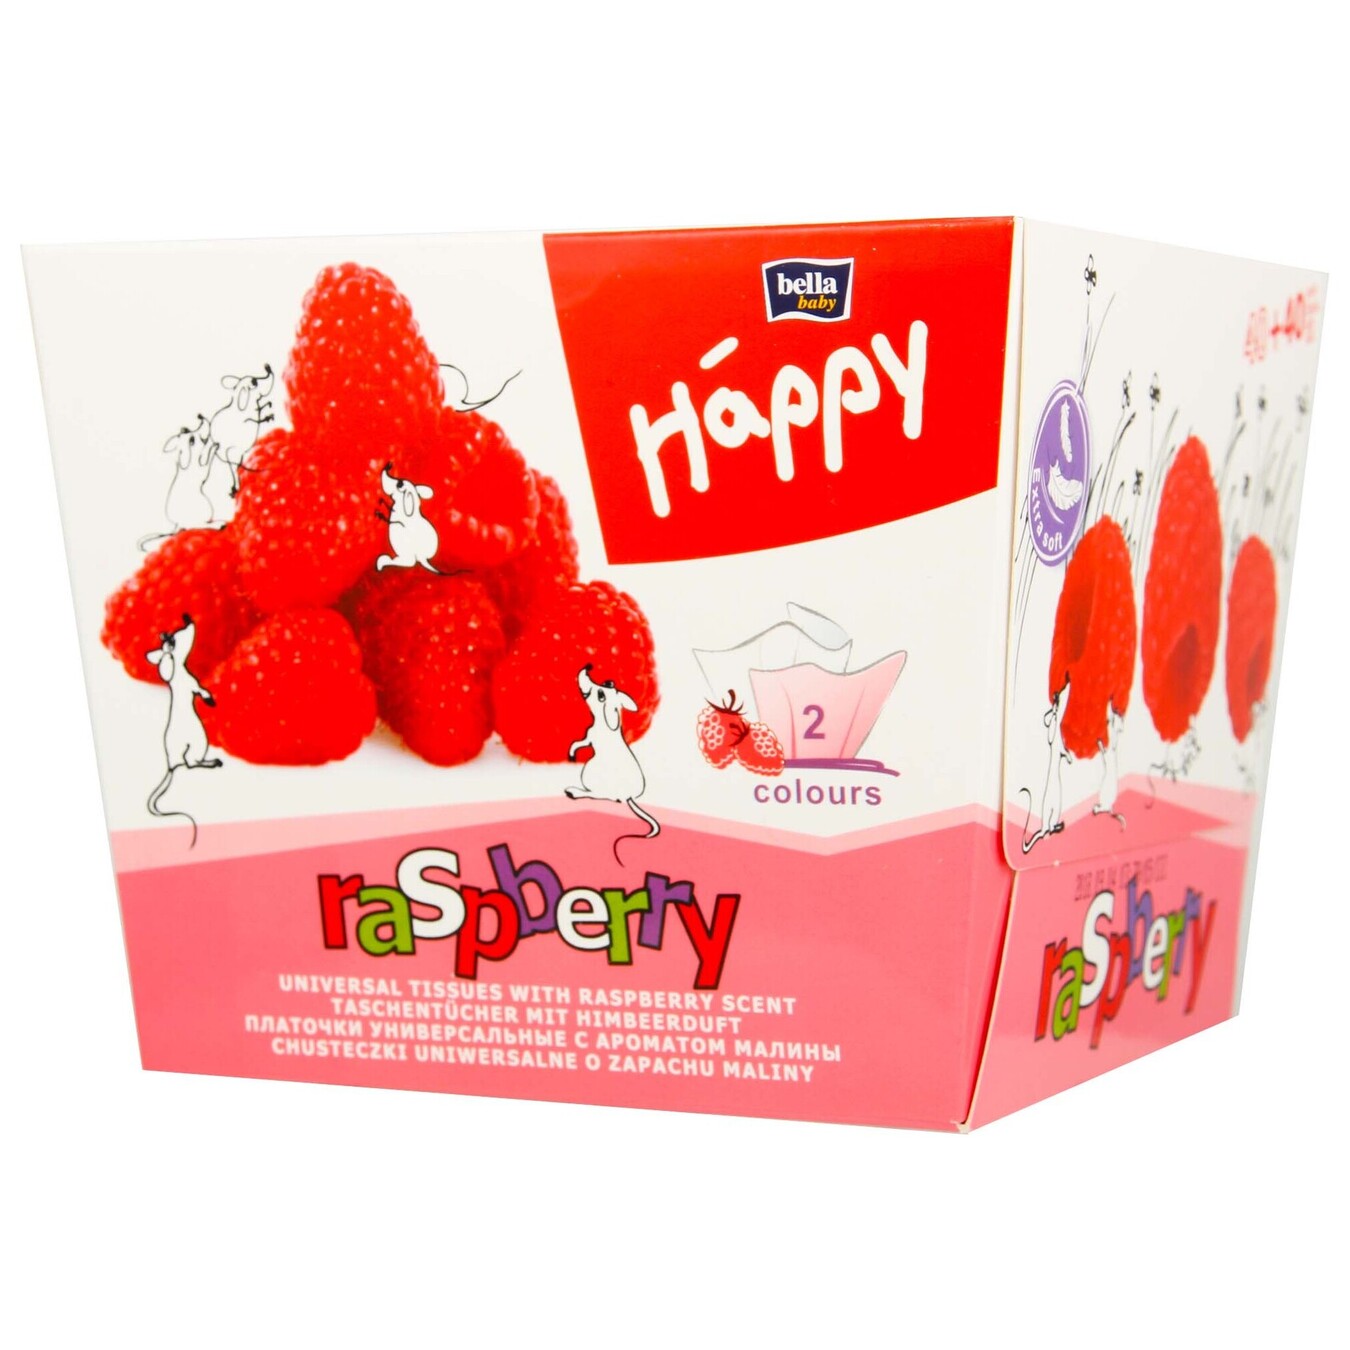 Universal two-layer paper handkerchiefs Bella Baby Happy 40+40 pieces with raspberry aroma 2